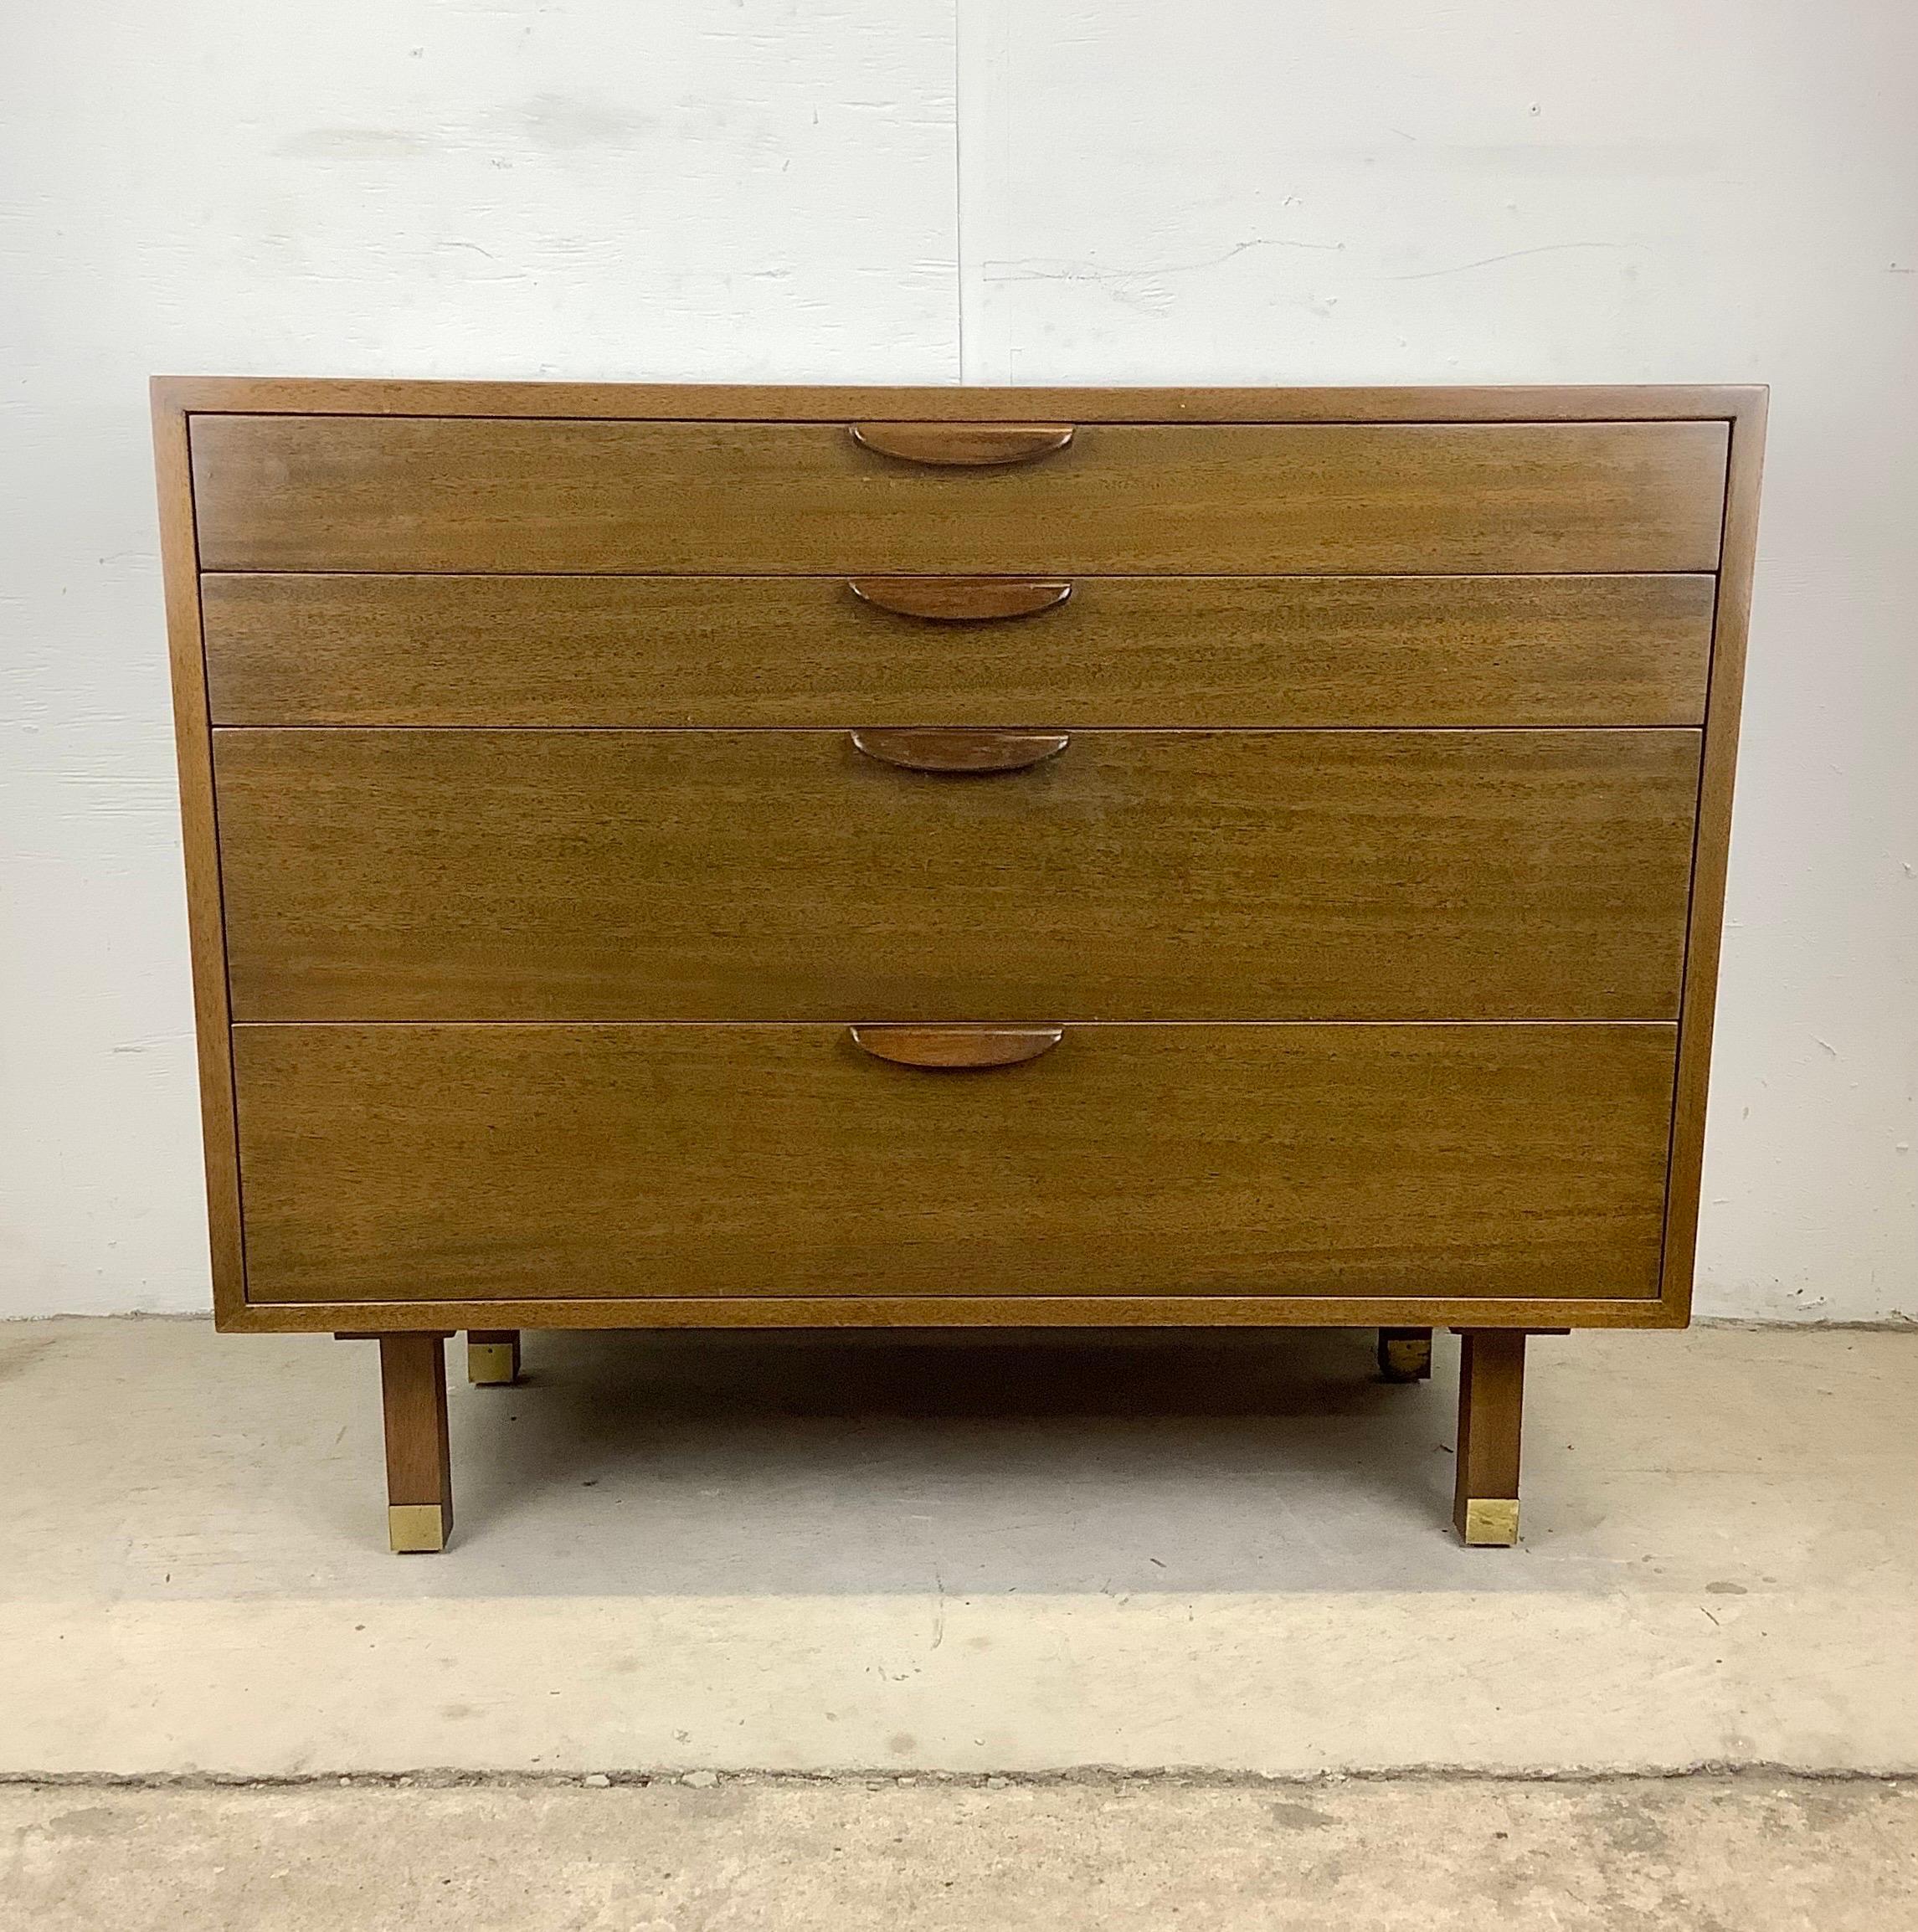 This striking Mid-Century Modern dresser and desk set from designer Harvey Probber features quality 1950s design in a vintage Mahogany finish. The carved wood handles and brass sabot feet add to the mid-century appeal of the matching modular corner